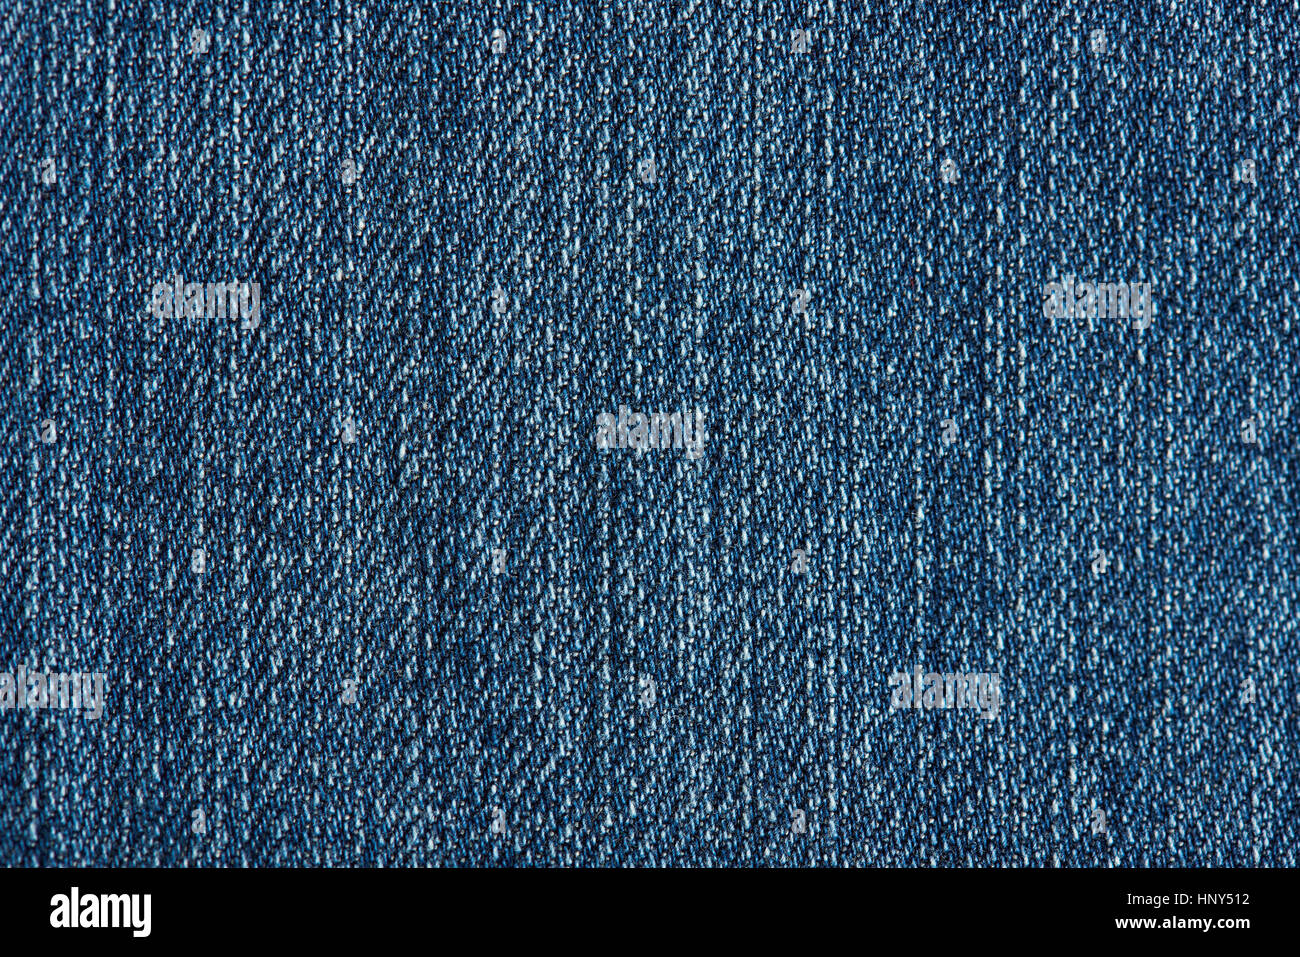 Texture of blue jeans fabric vertical lines. Pattern of blue jeans Stock Photo